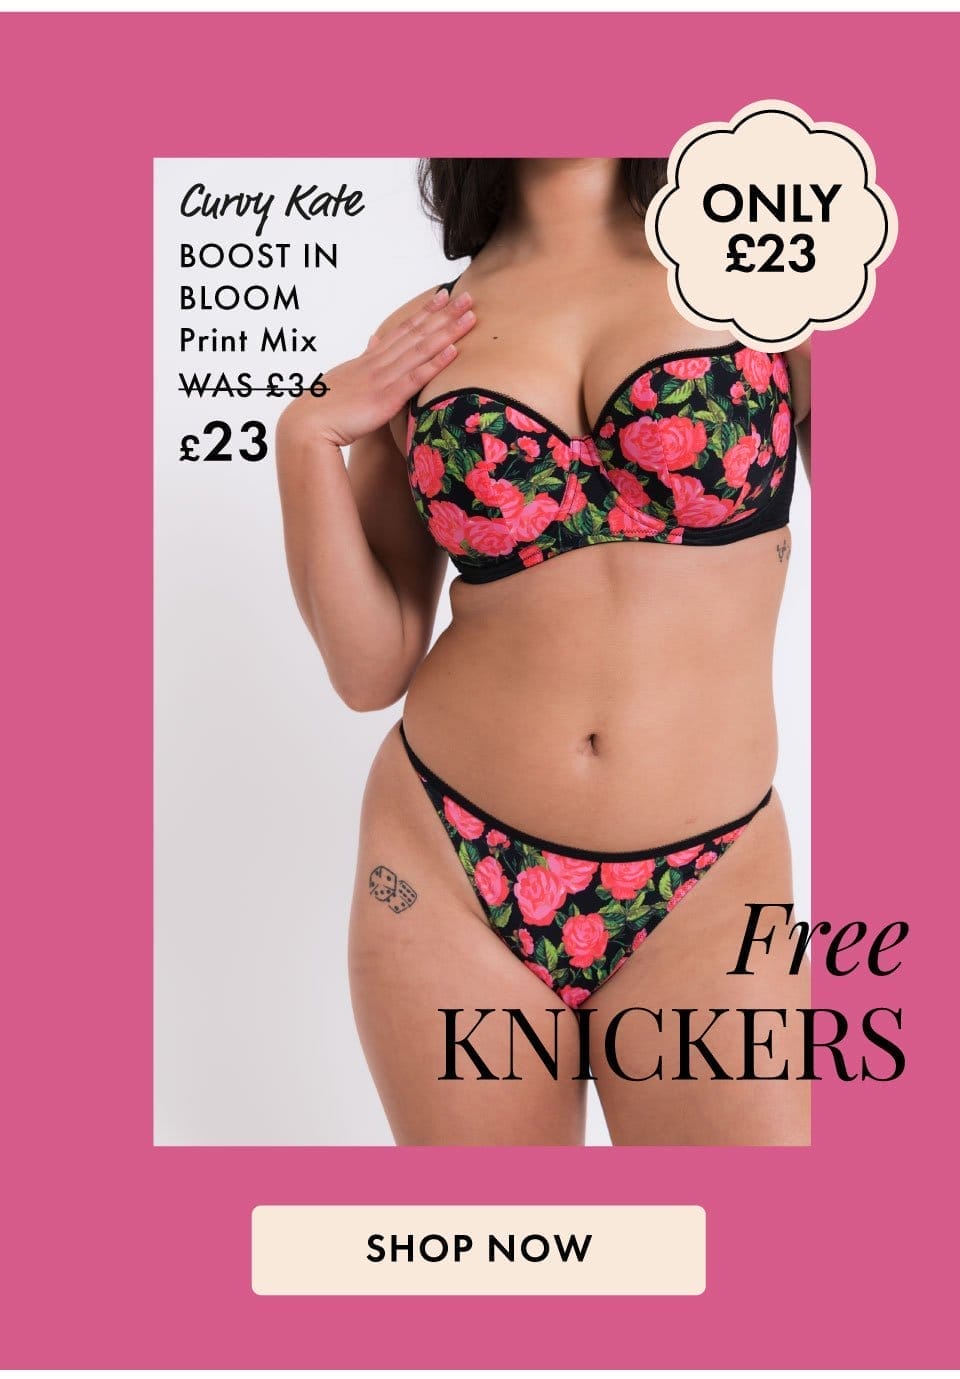 Free Knickers - Bank Holiday Outlet Weekend - up to 70% off | Must end Monday